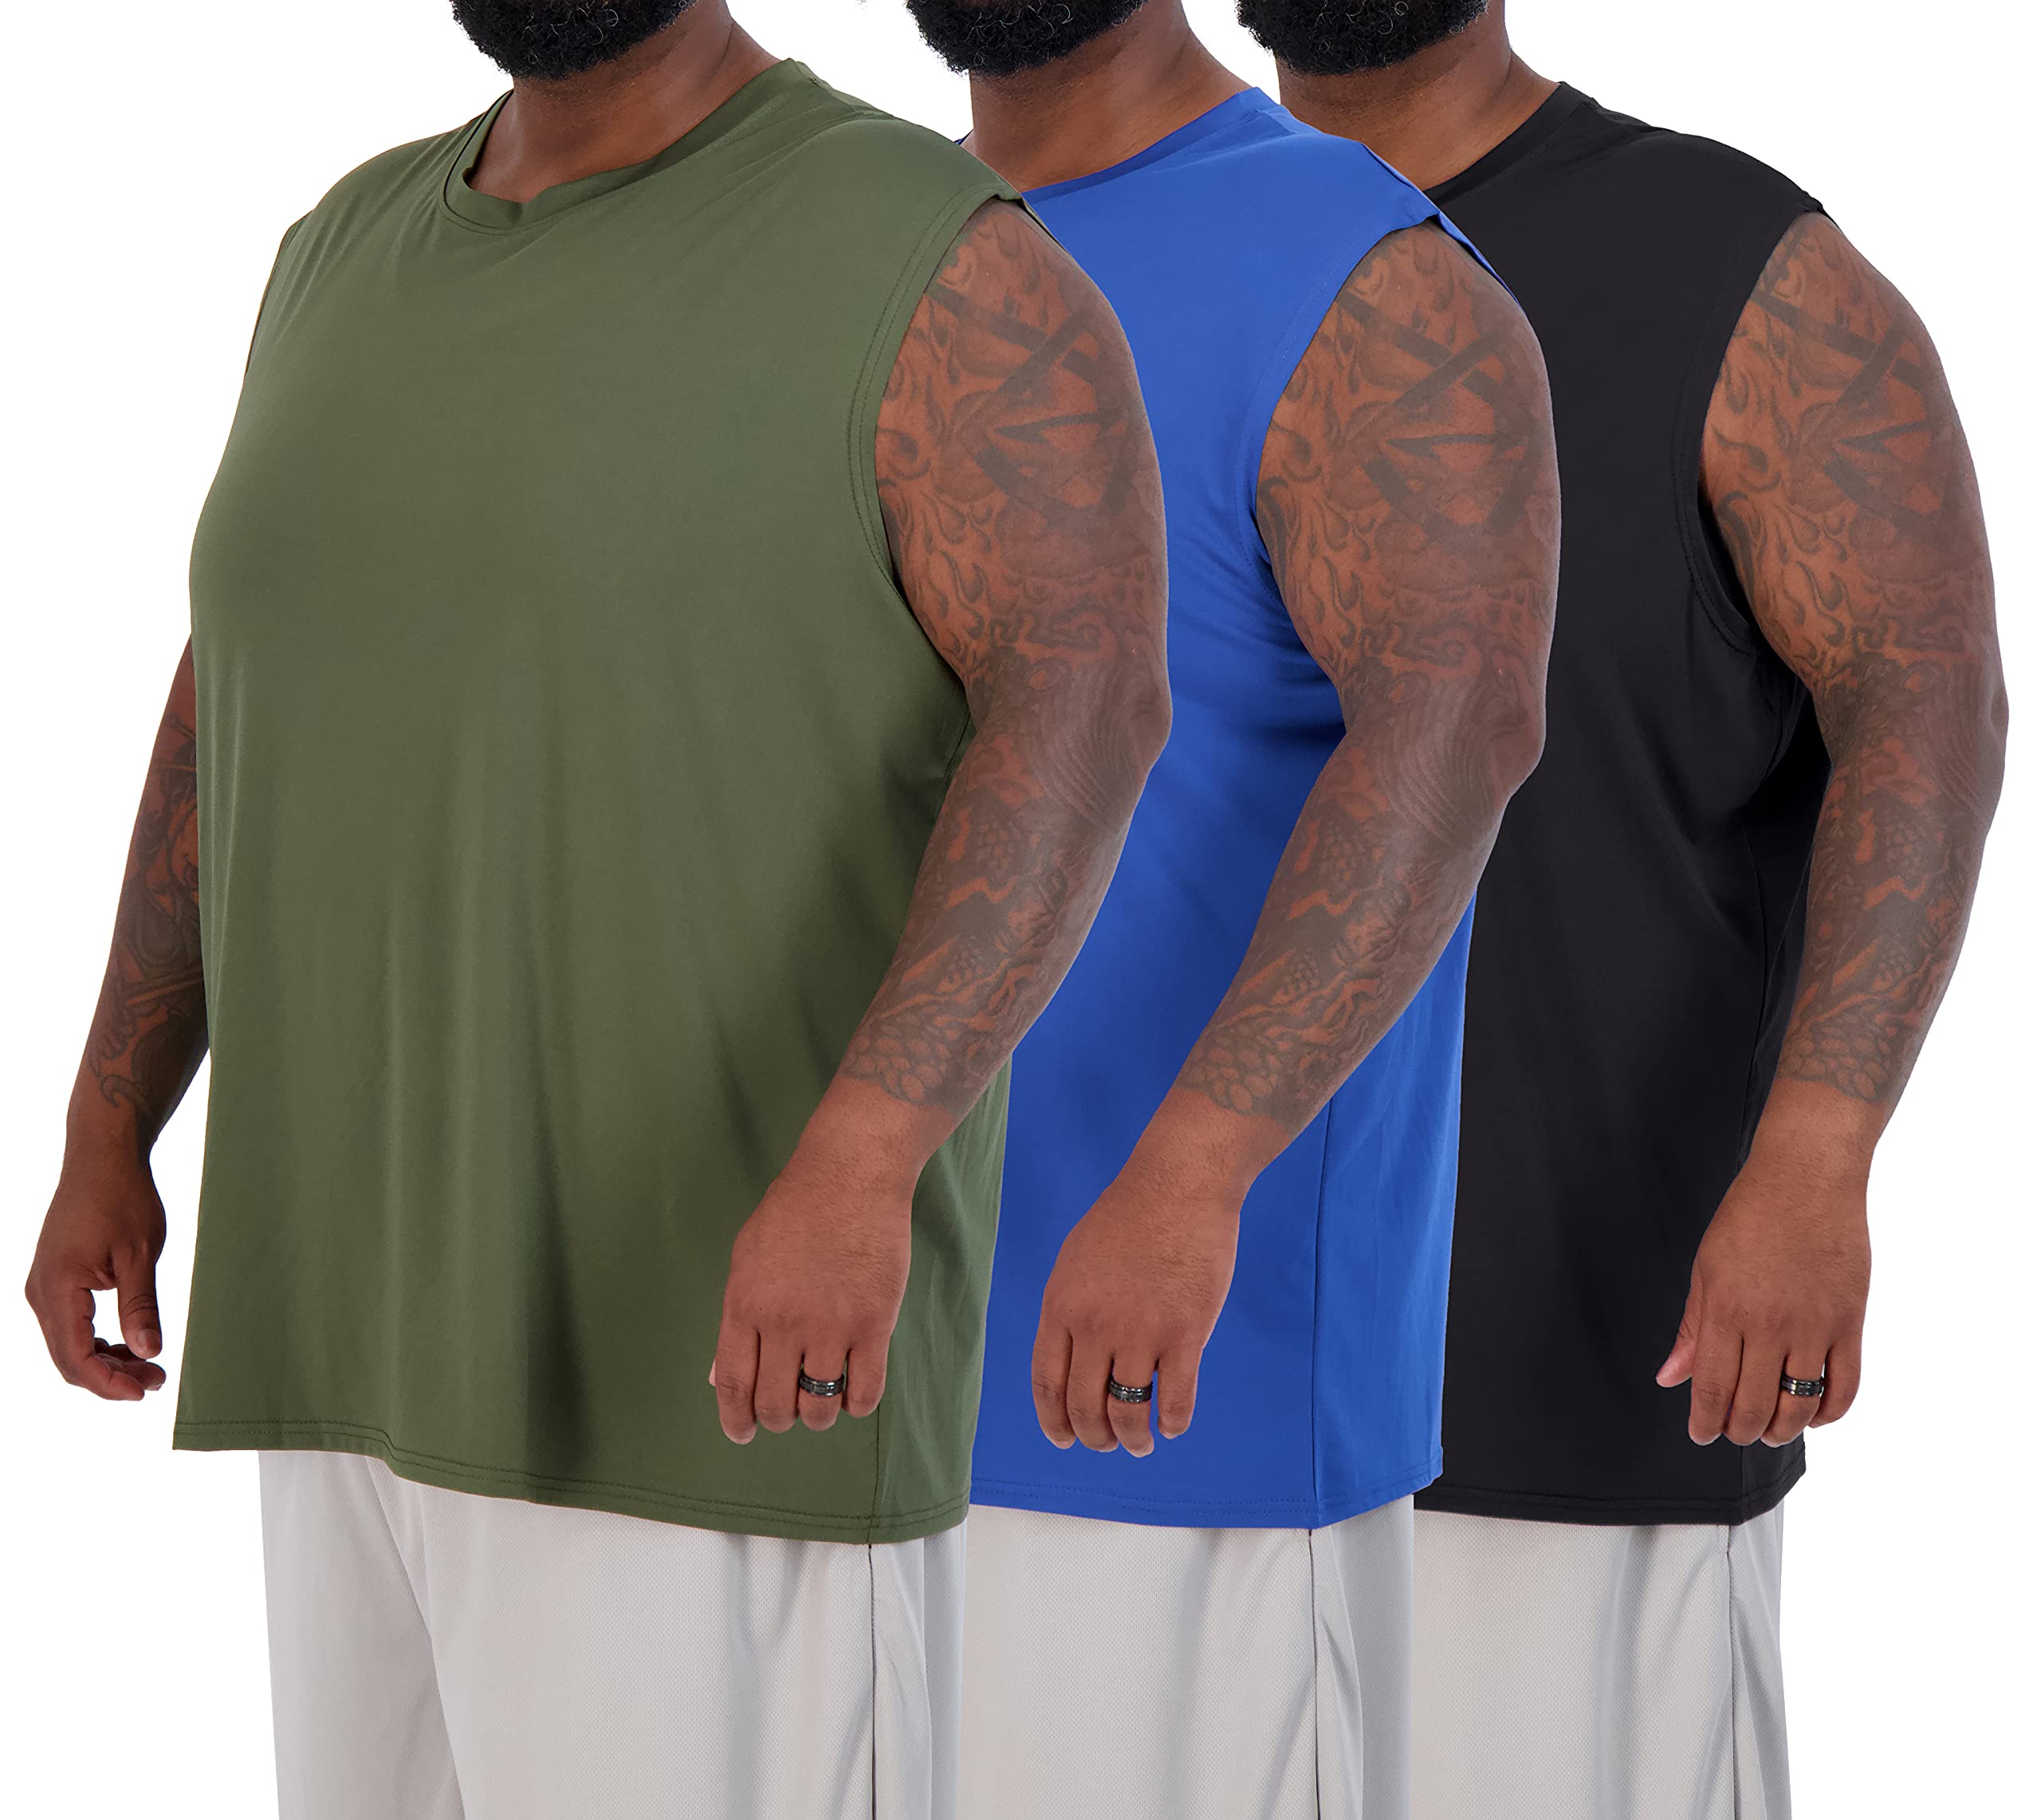 Real Essentials 3 Pack: Mens Big and Tall Active Quick Dry Fit Tank Top Wicking Active Athletic gym Top Plus Size clothes Lounge Sleep Running E